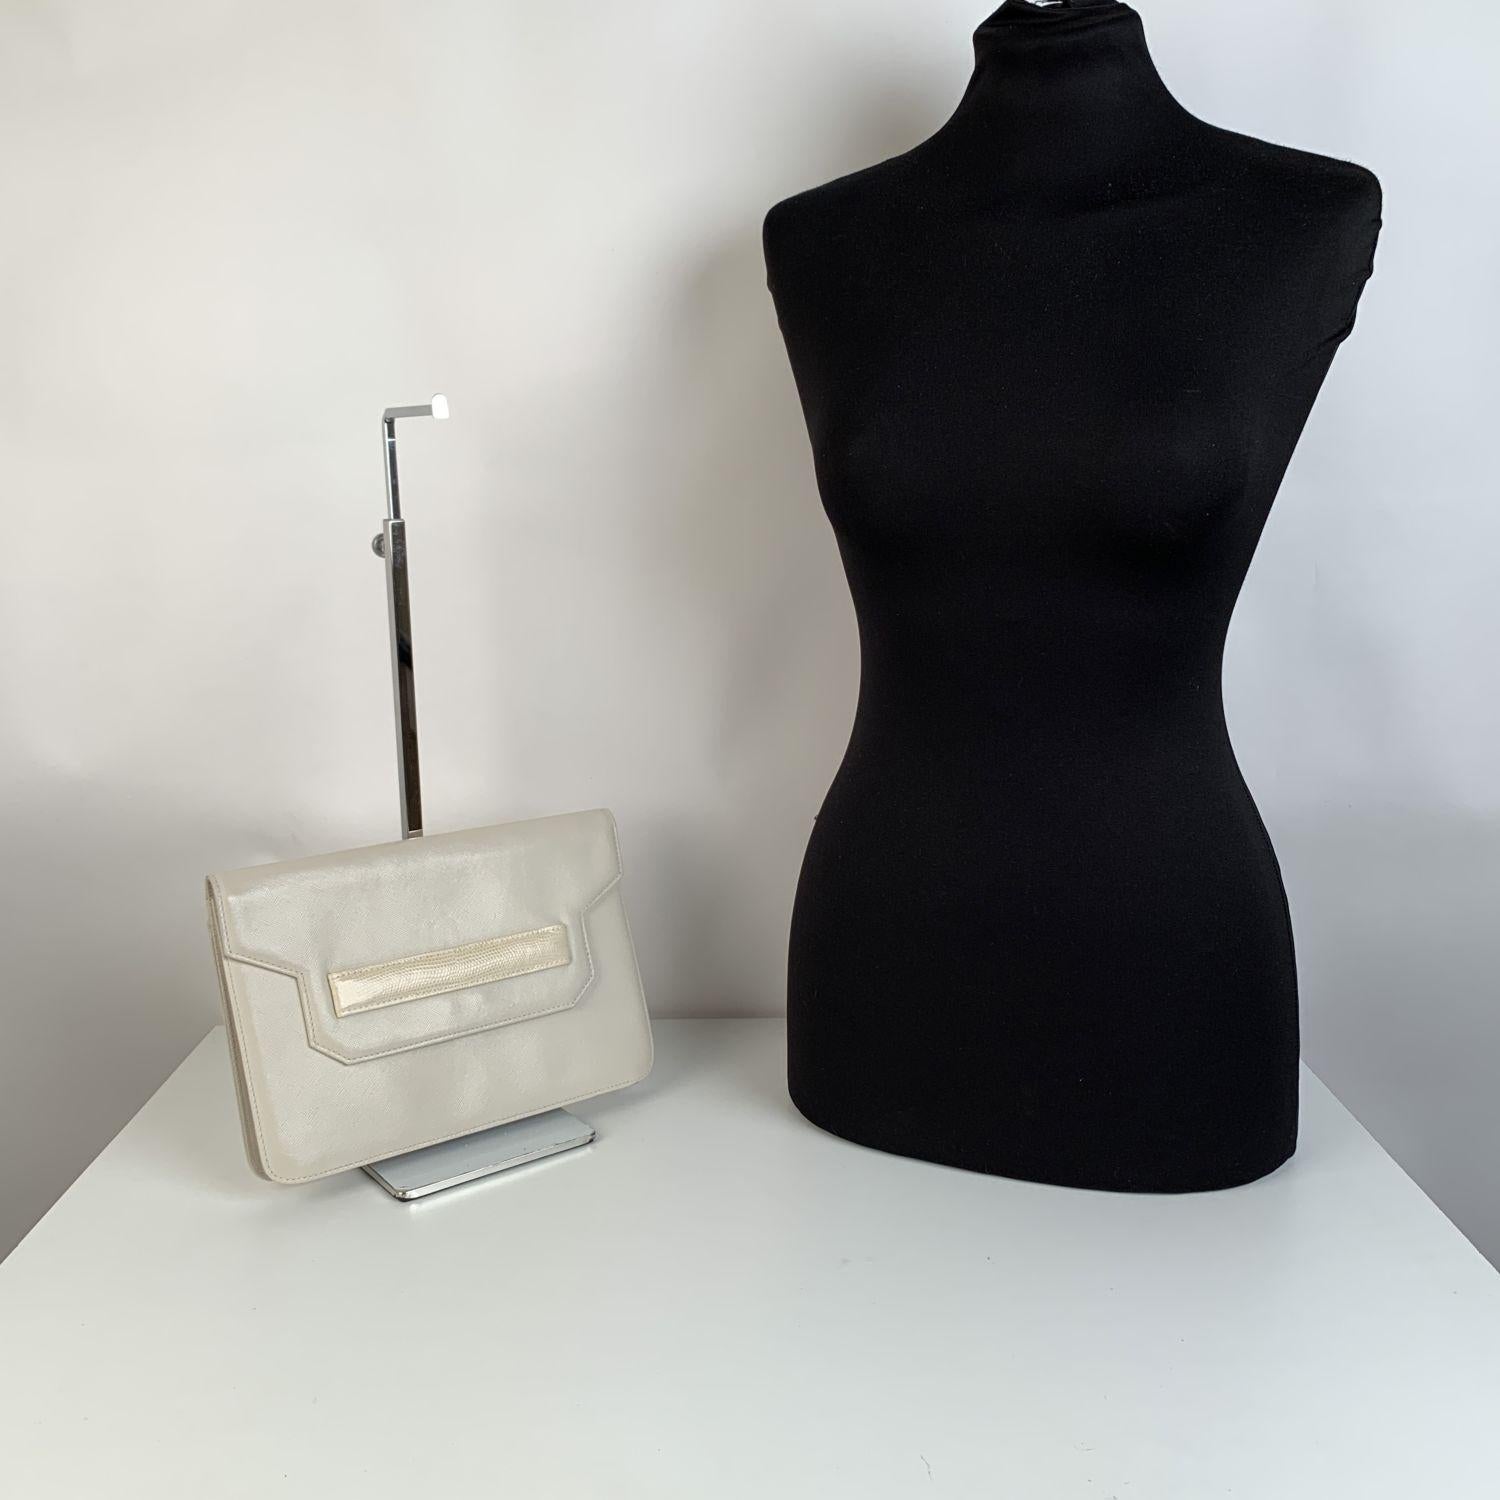 YVES SAINT LAURENT clutch bag in white leather with front handle. Flap closure with magnetic button closure. Fabric signature lining. 1 side zip pocket inside. 'YVES SAINT LAURENT' signature embossed inside.




Details

MATERIAL: Leather

COLOR: